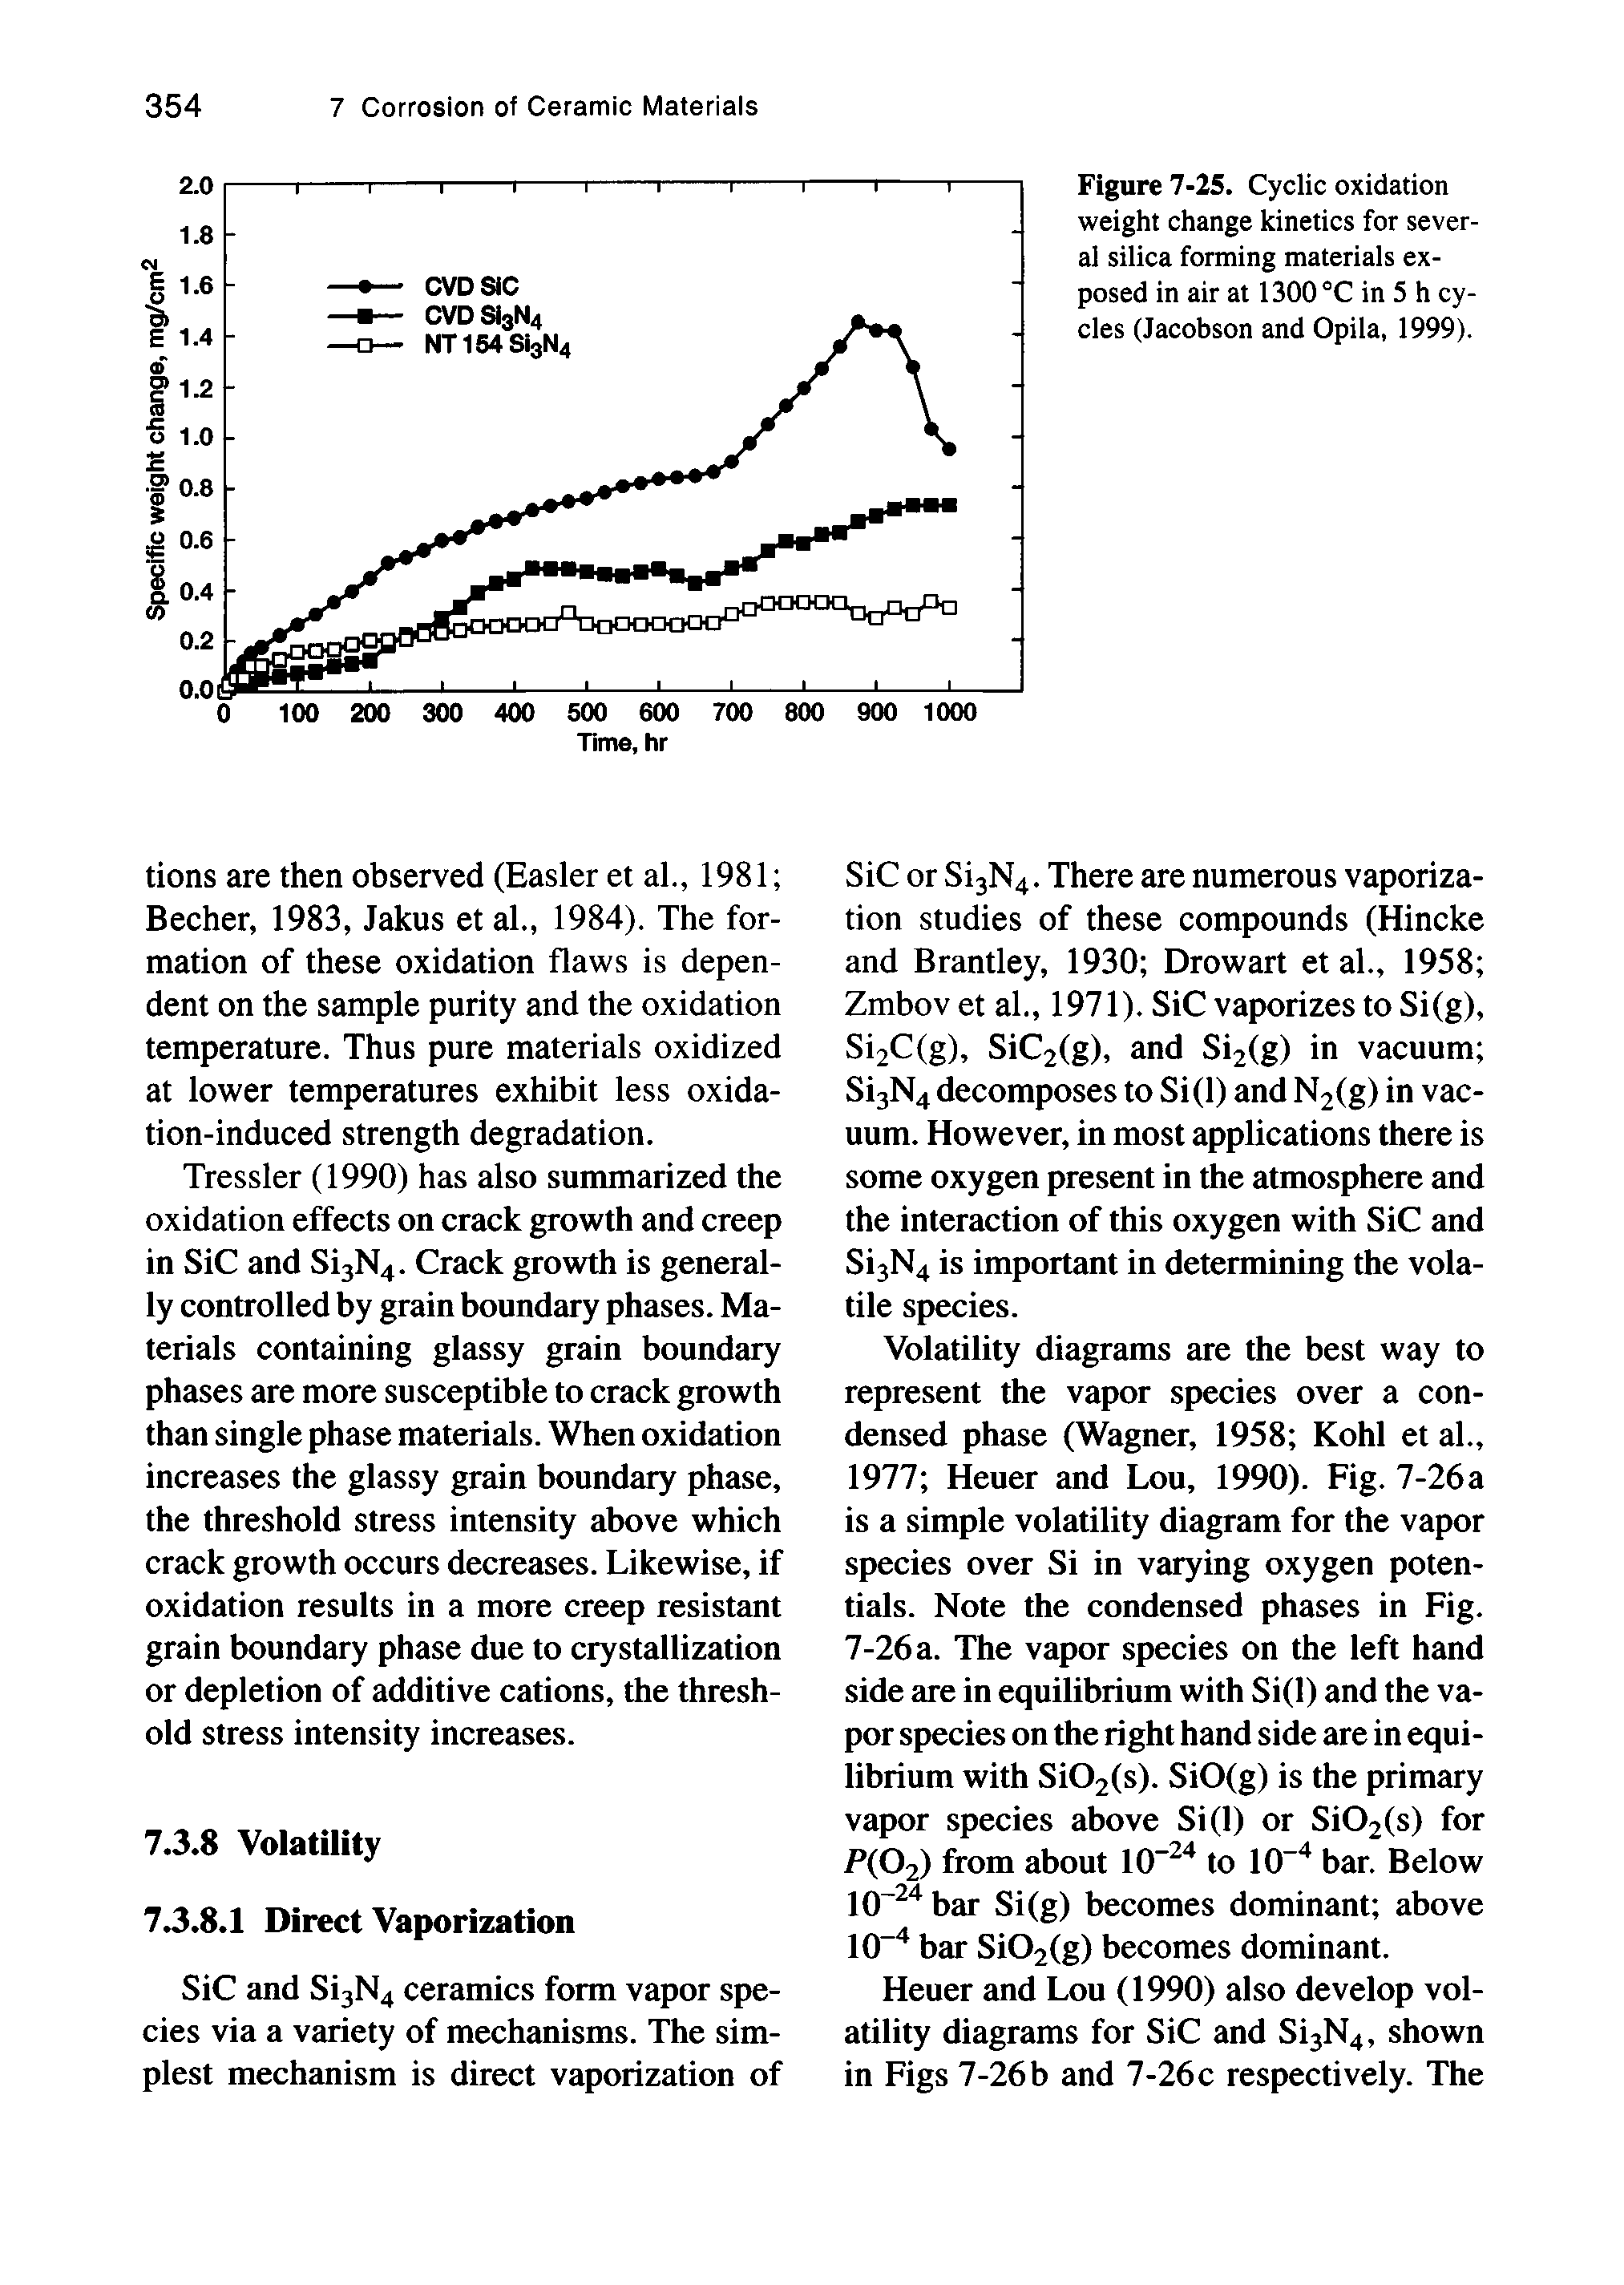 Figure 7-25. Cyclic oxidation weight change kinetics for several silica forming materials exposed in air at 1300 °C in 5 h cycles (Jacobson and Opila, 1999).